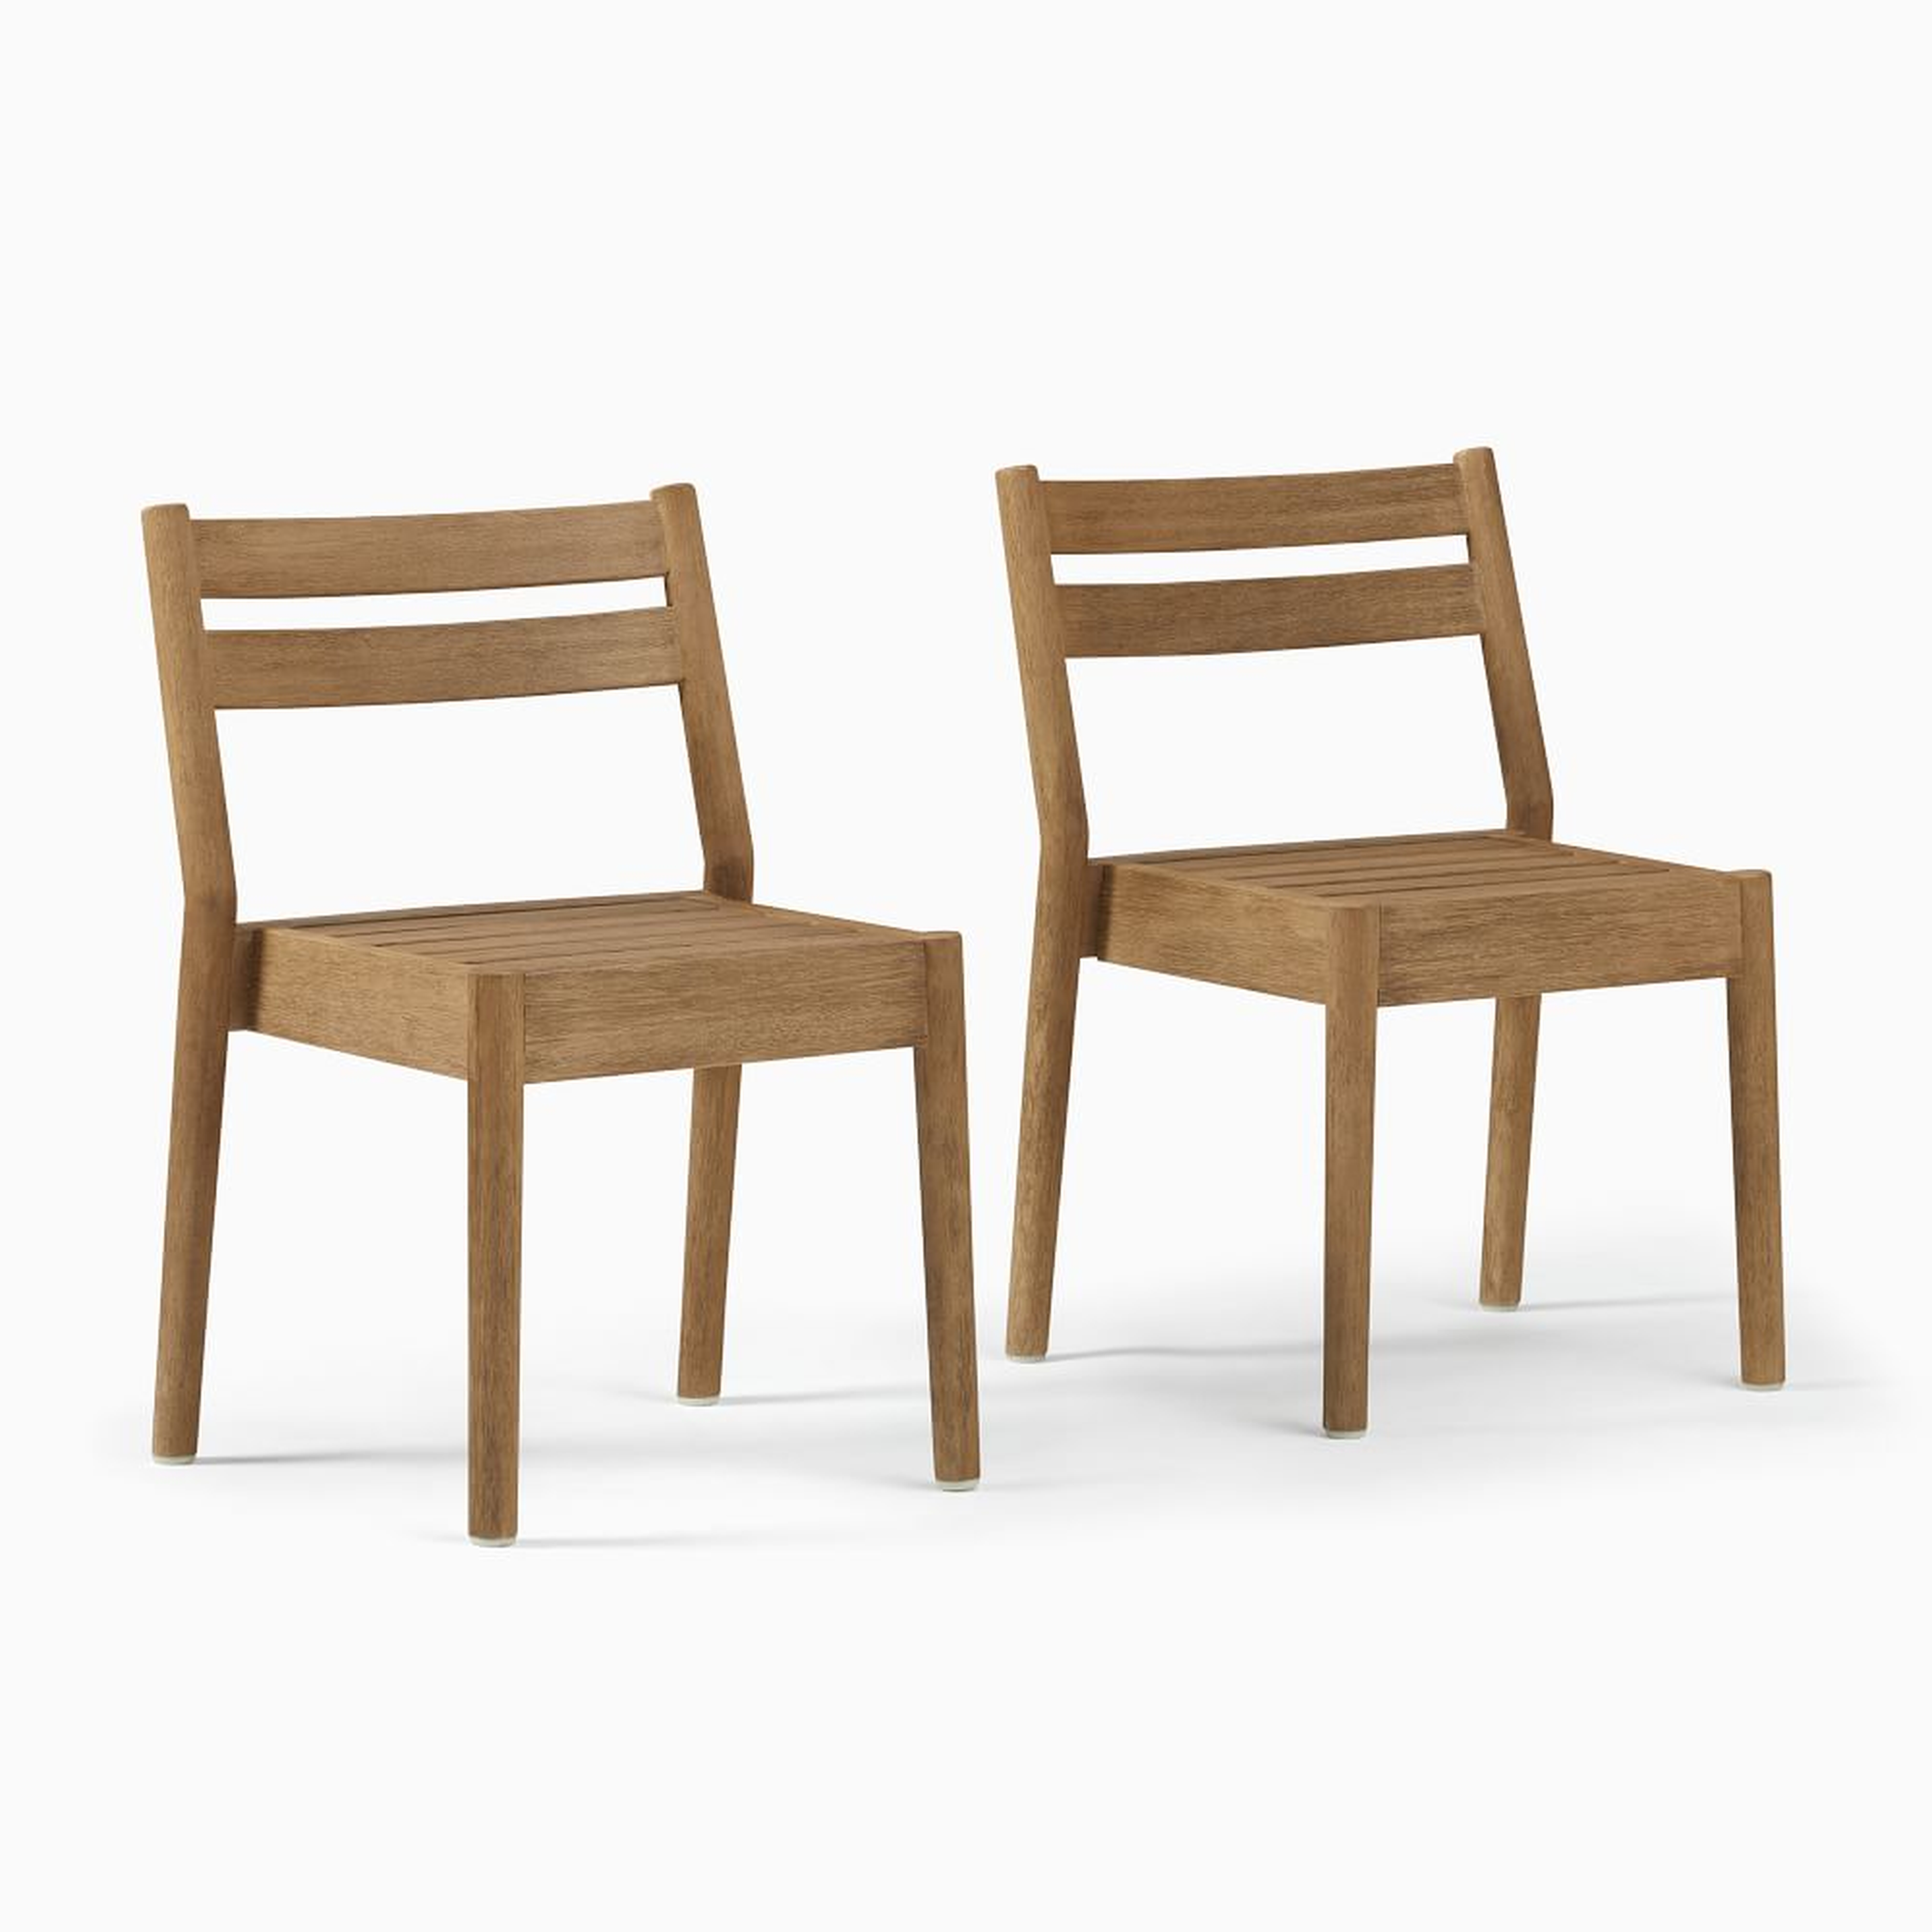 Hargrove Outdoor Dining Chair, Set Of 2 Dining Chair, Reef - West Elm